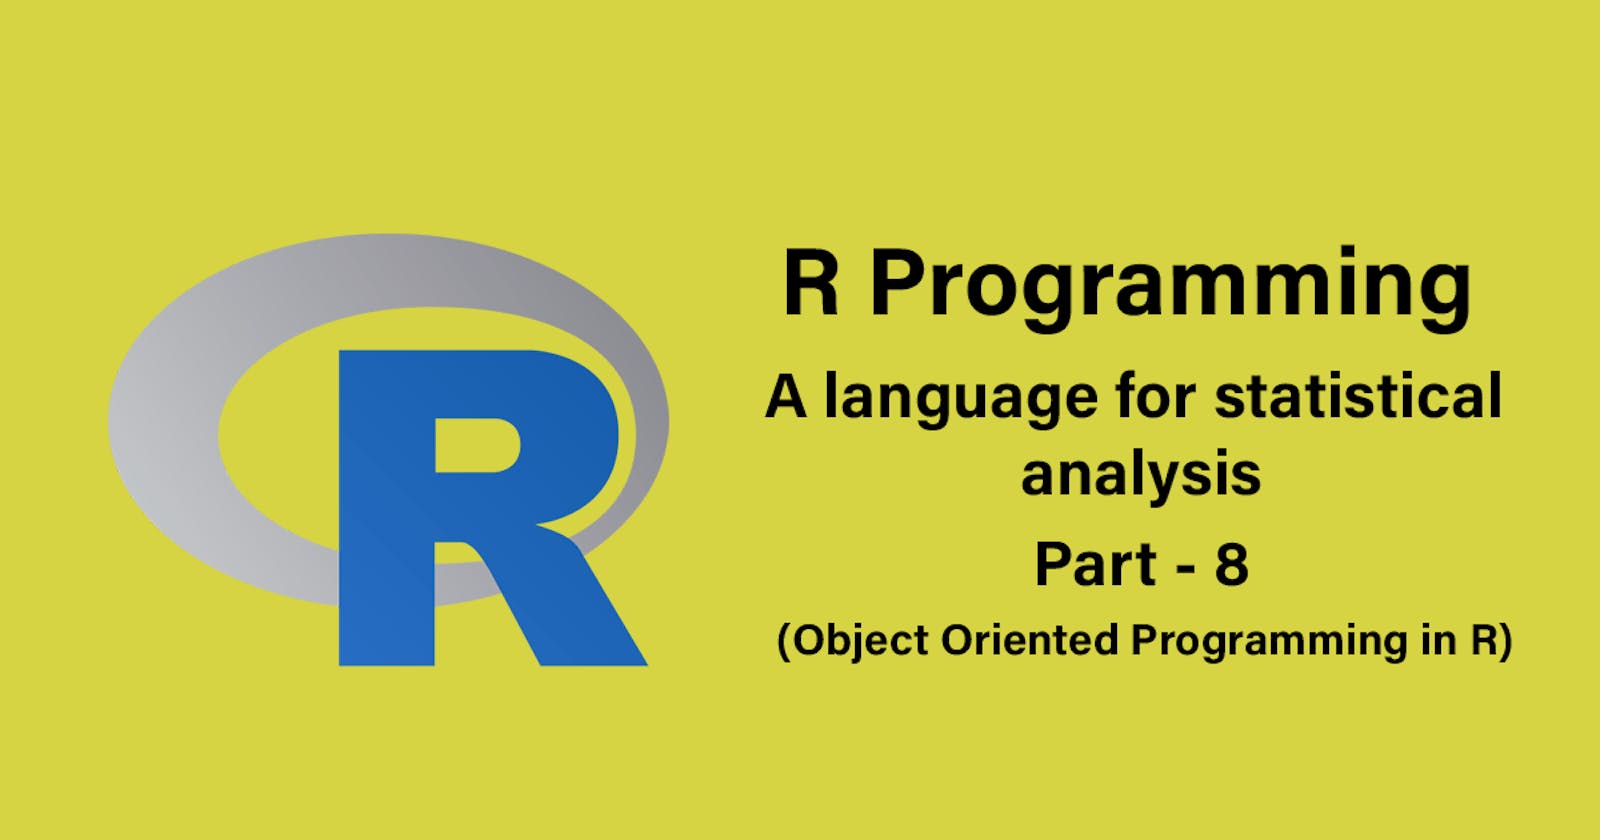 R programming - Object Oriented Programming